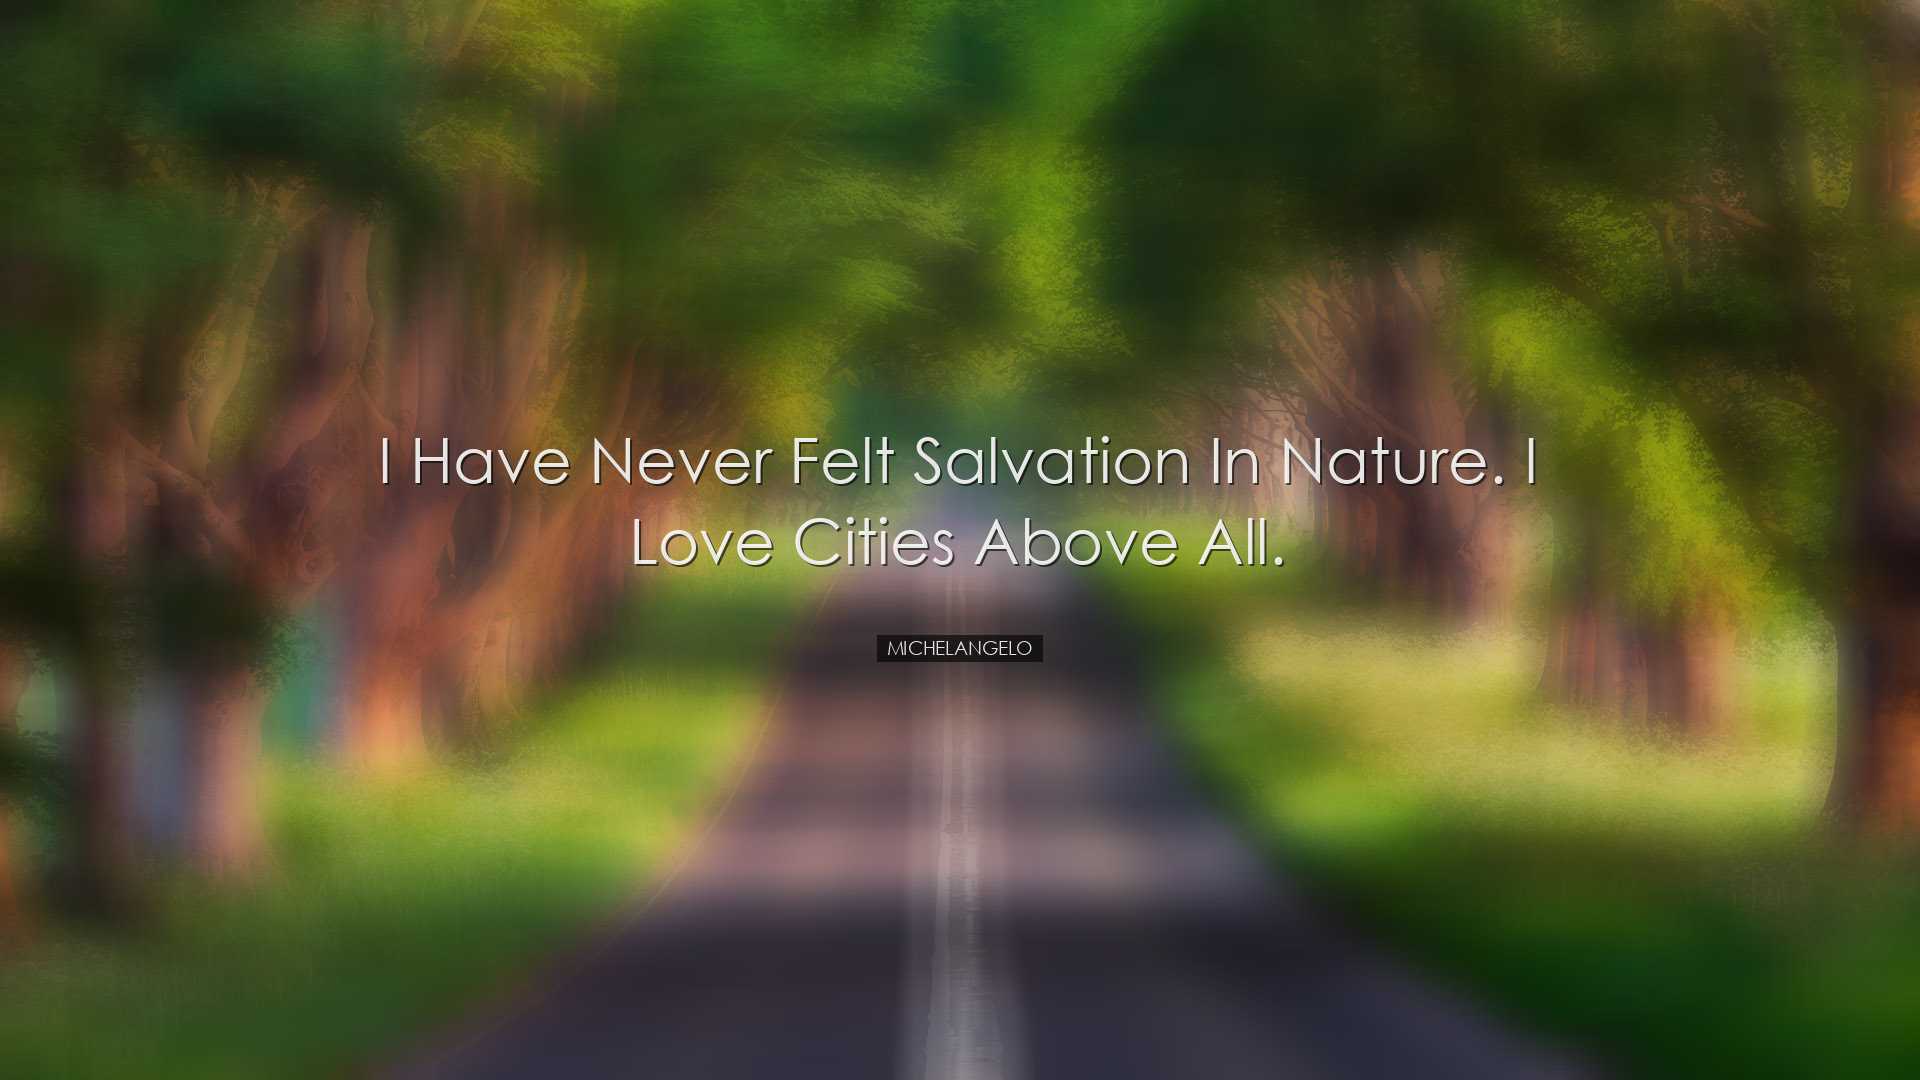 I have never felt salvation in nature. I love cities above all. -